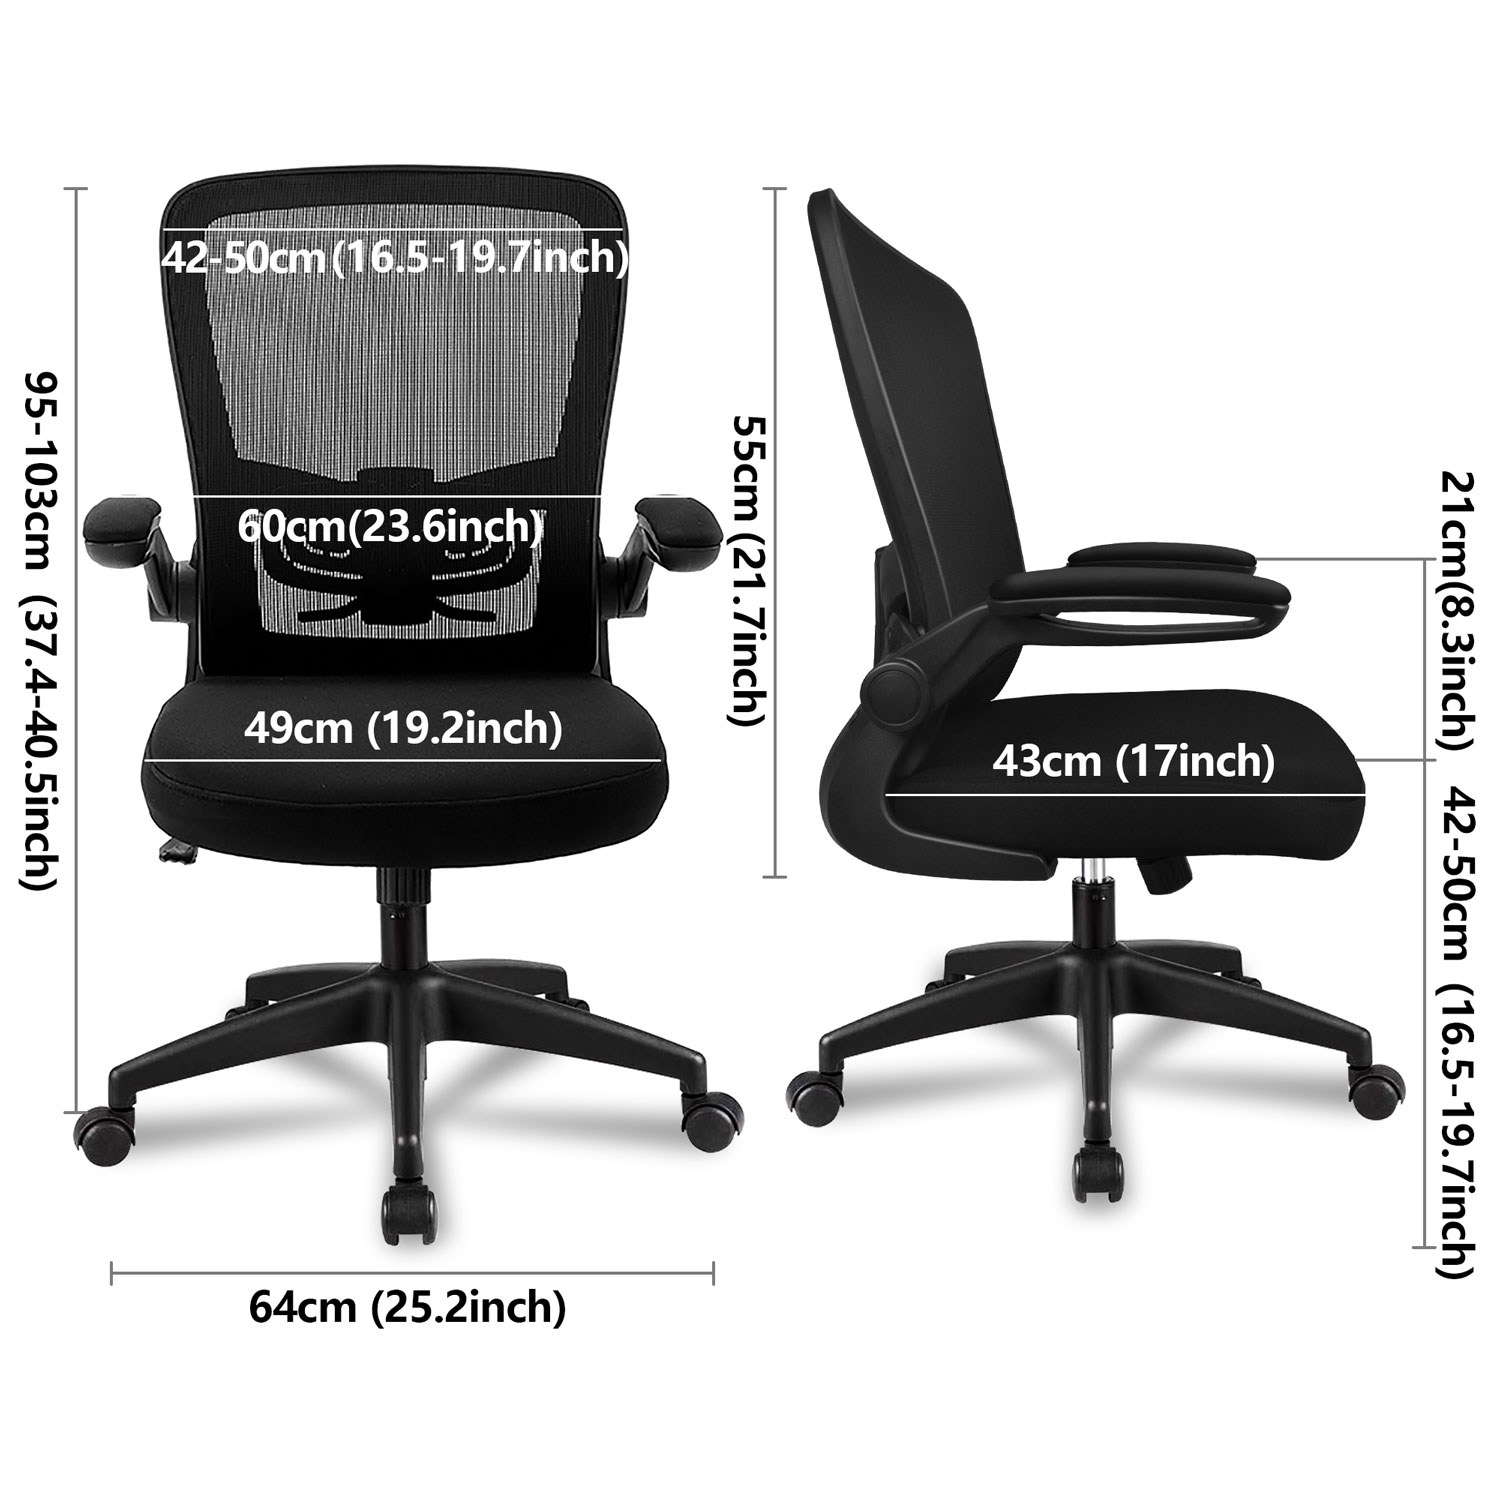 KERDOM Office Chair with Adjustable Lumbar Support - Black/White